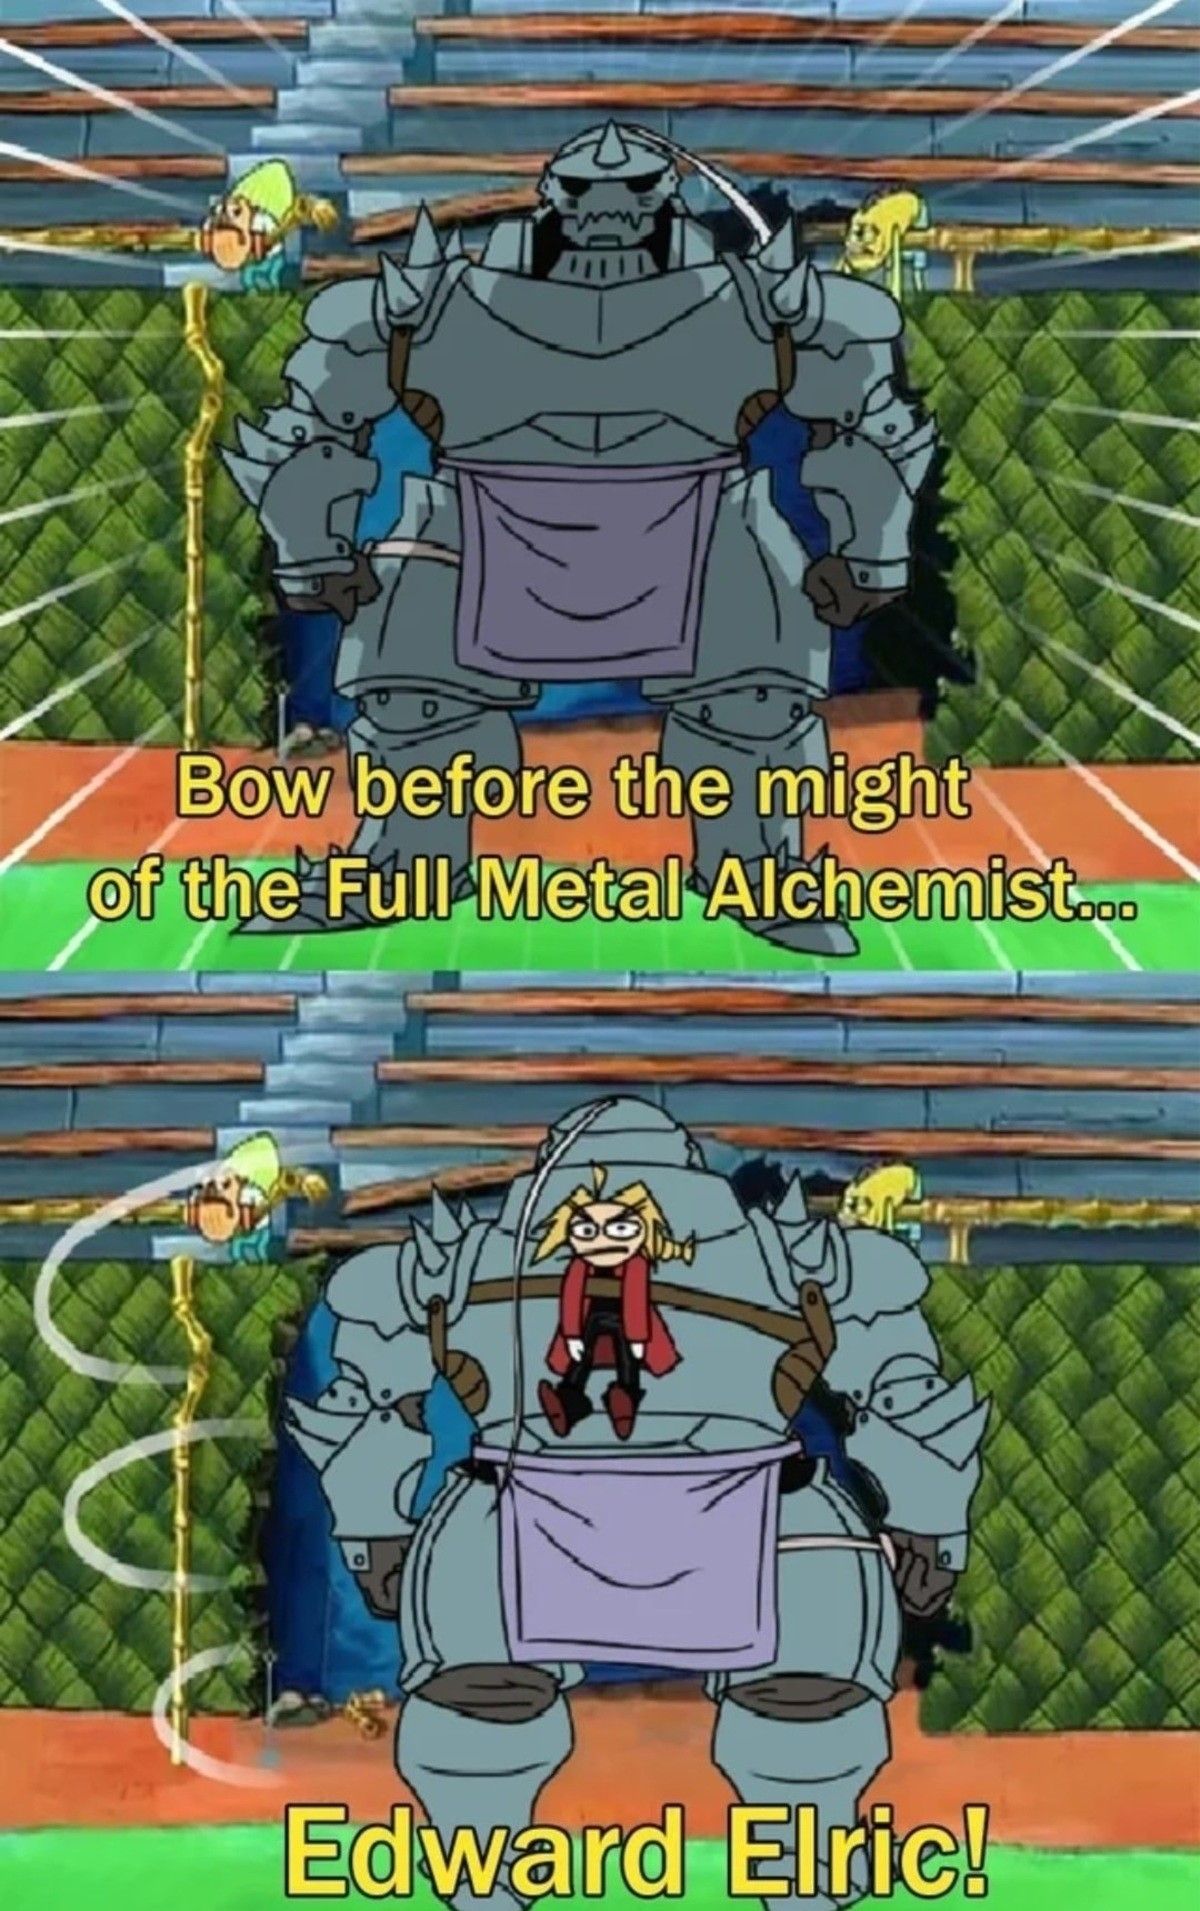 why is he called the full metal alchemist